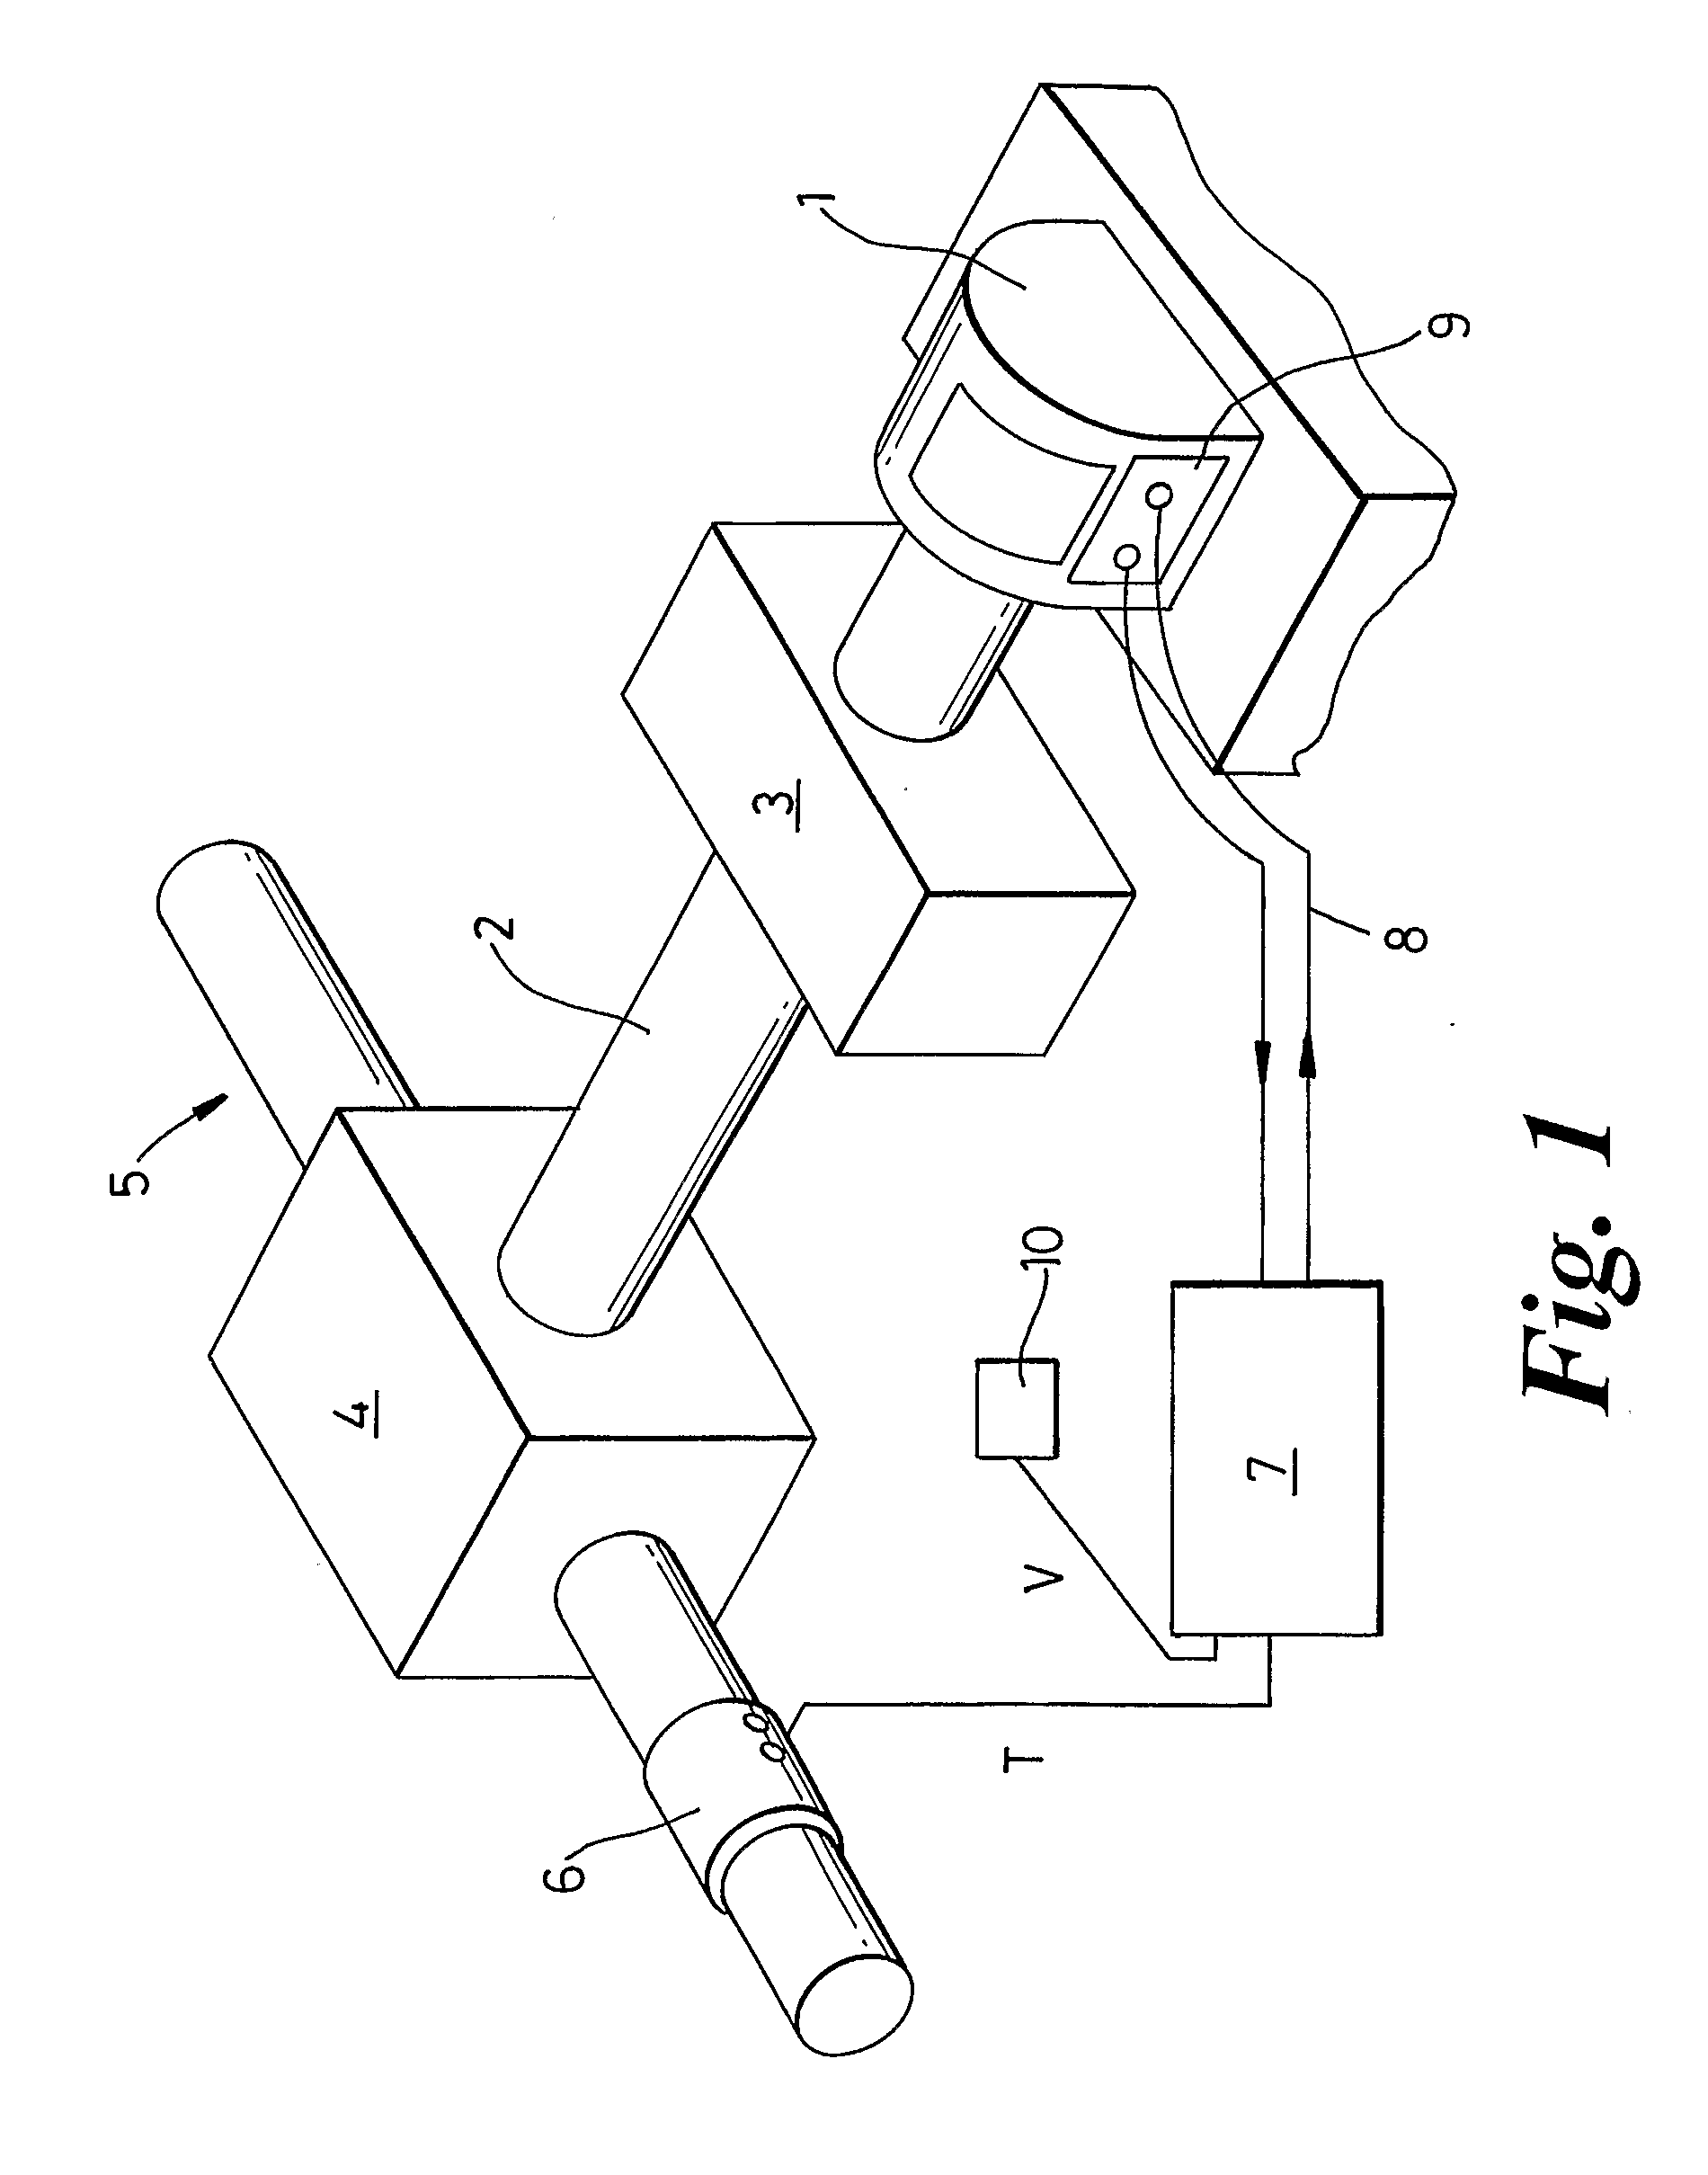 Electrical power assisted steering system